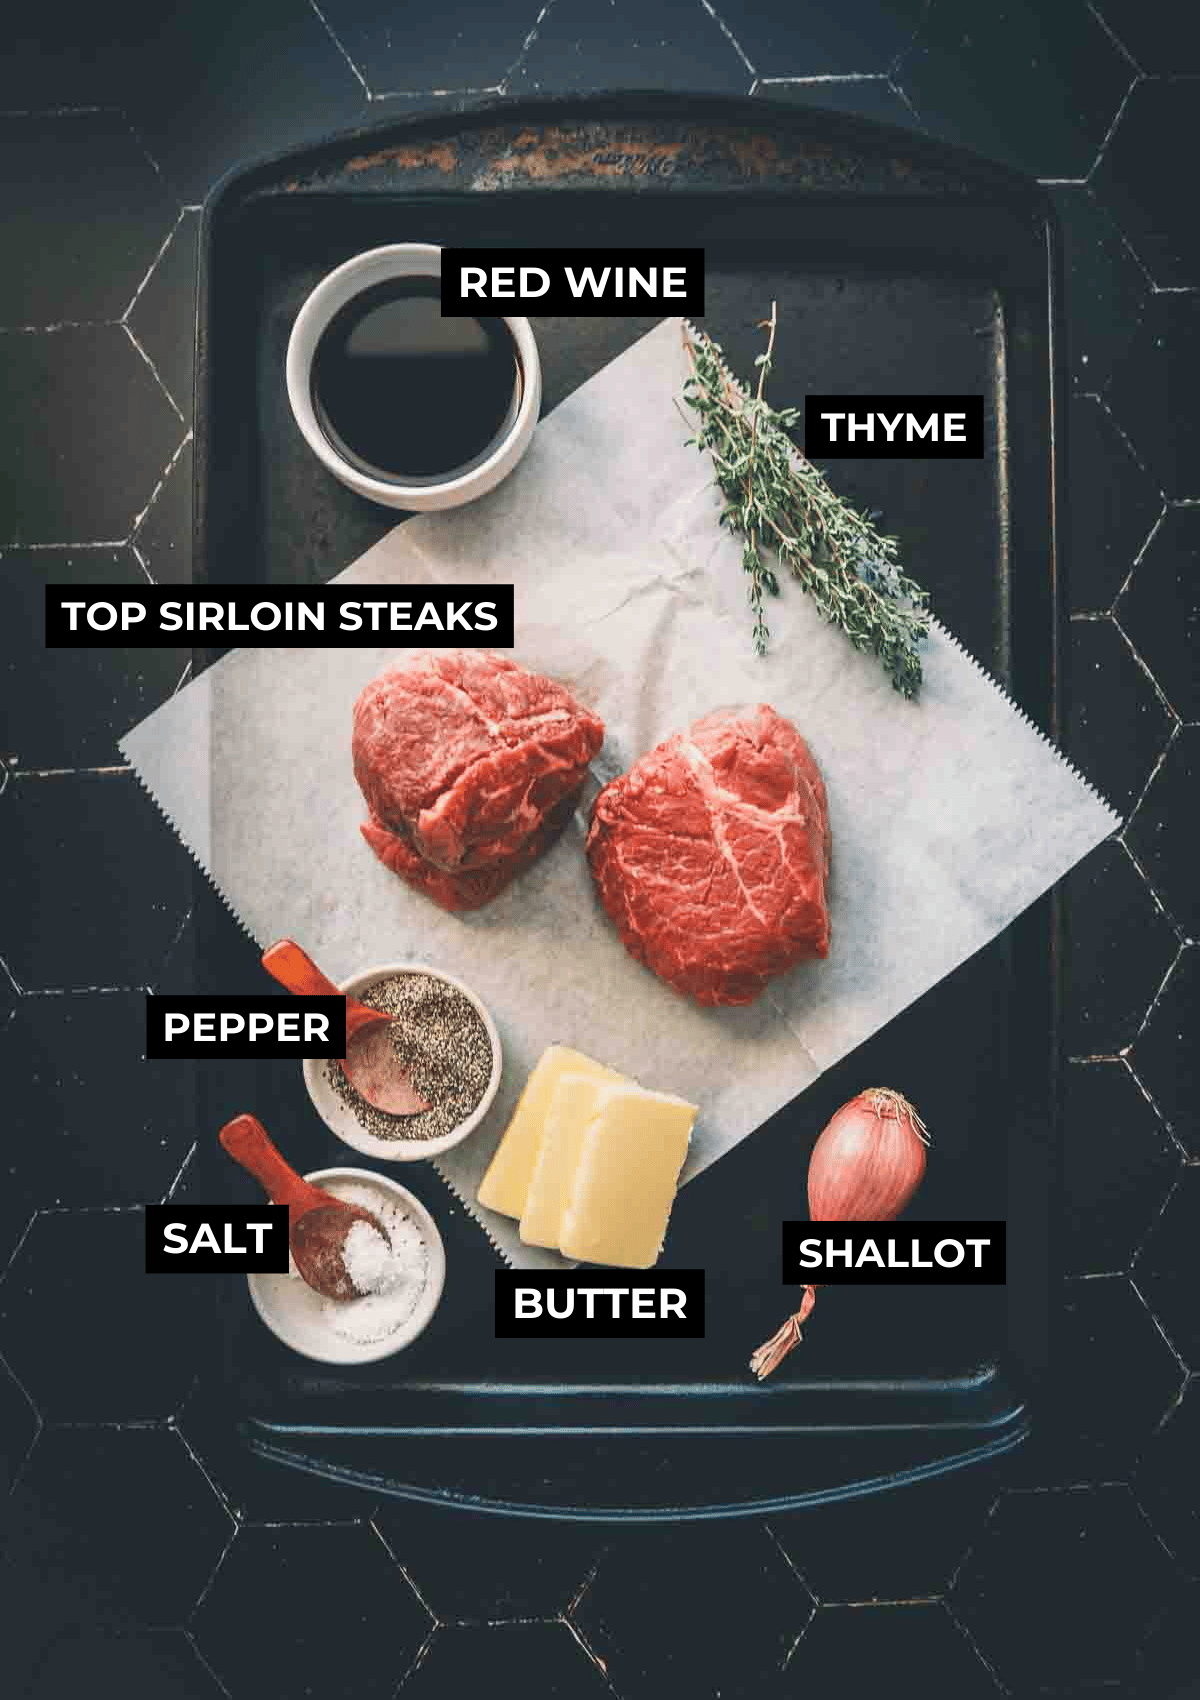 Ingredients for the steak recipe.